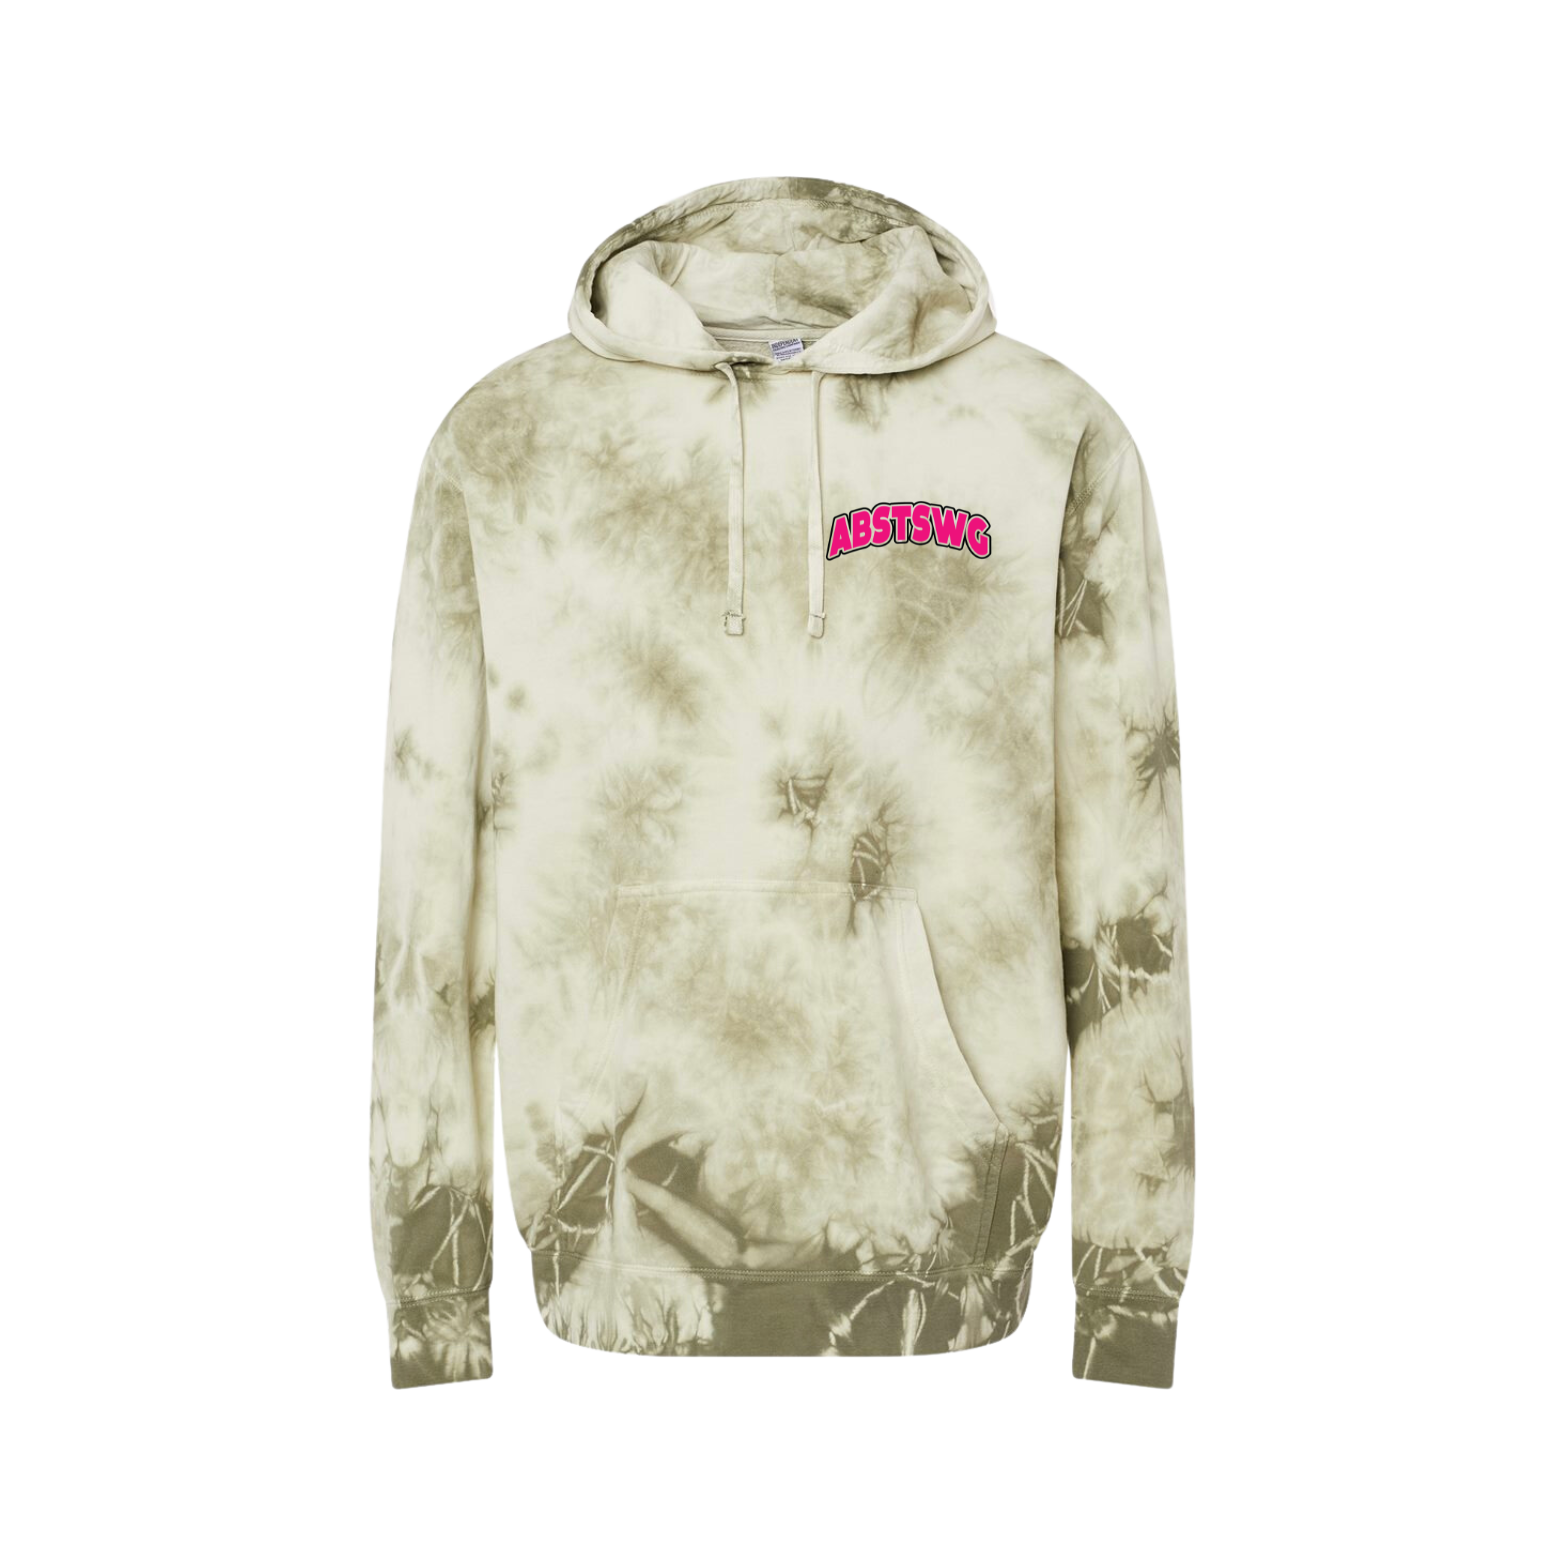 A-Best Hoodie - ADULT Tie-Dyed Puff